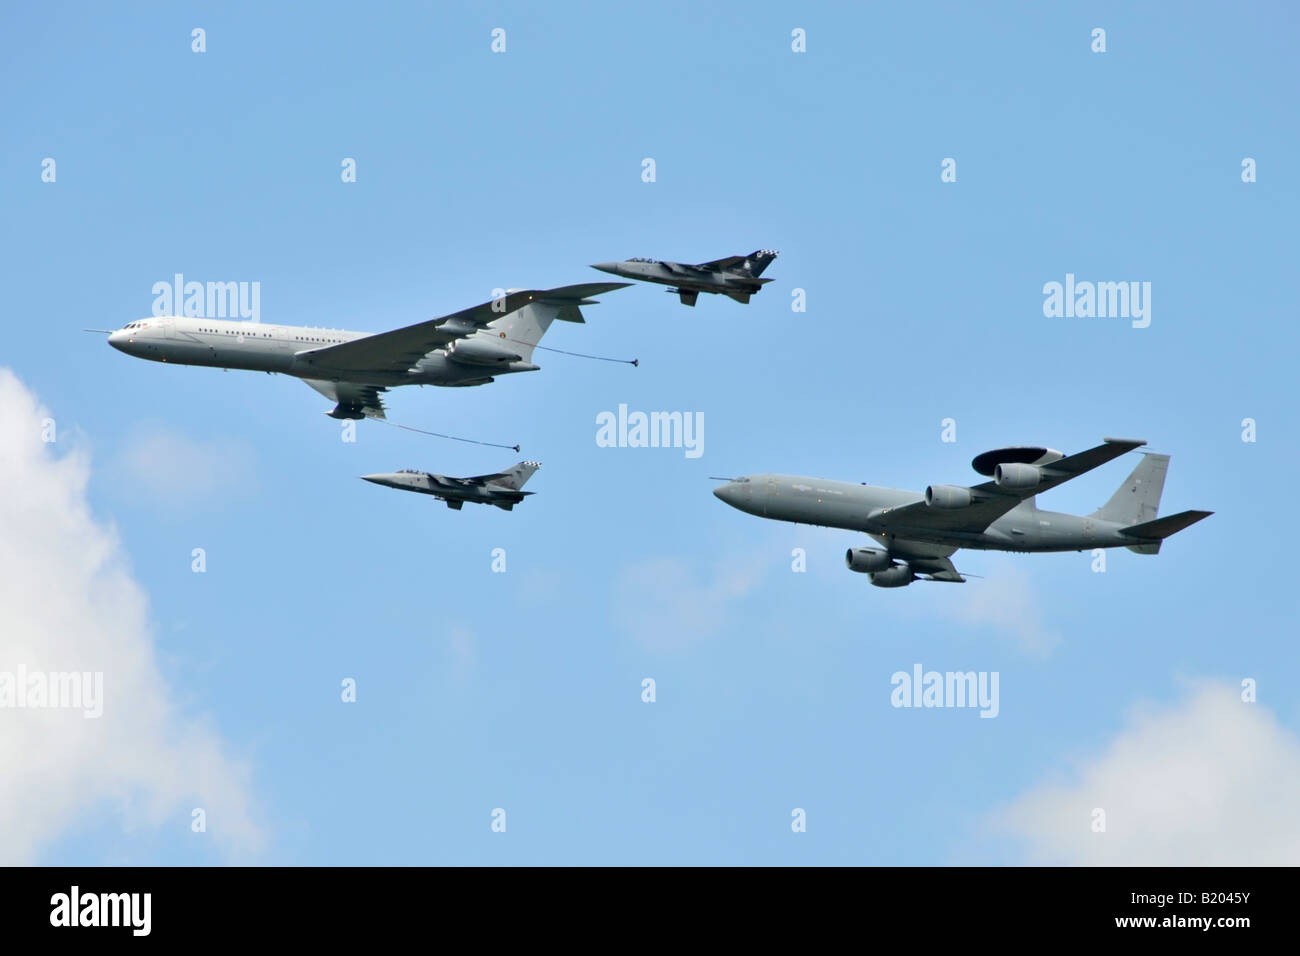 Formation of RAF Vickers VC10 in flight refuel tanker aircraft followed by Boeing E3 AWACS plane escorted by 2 Tornado FR3 jets Stock Photo